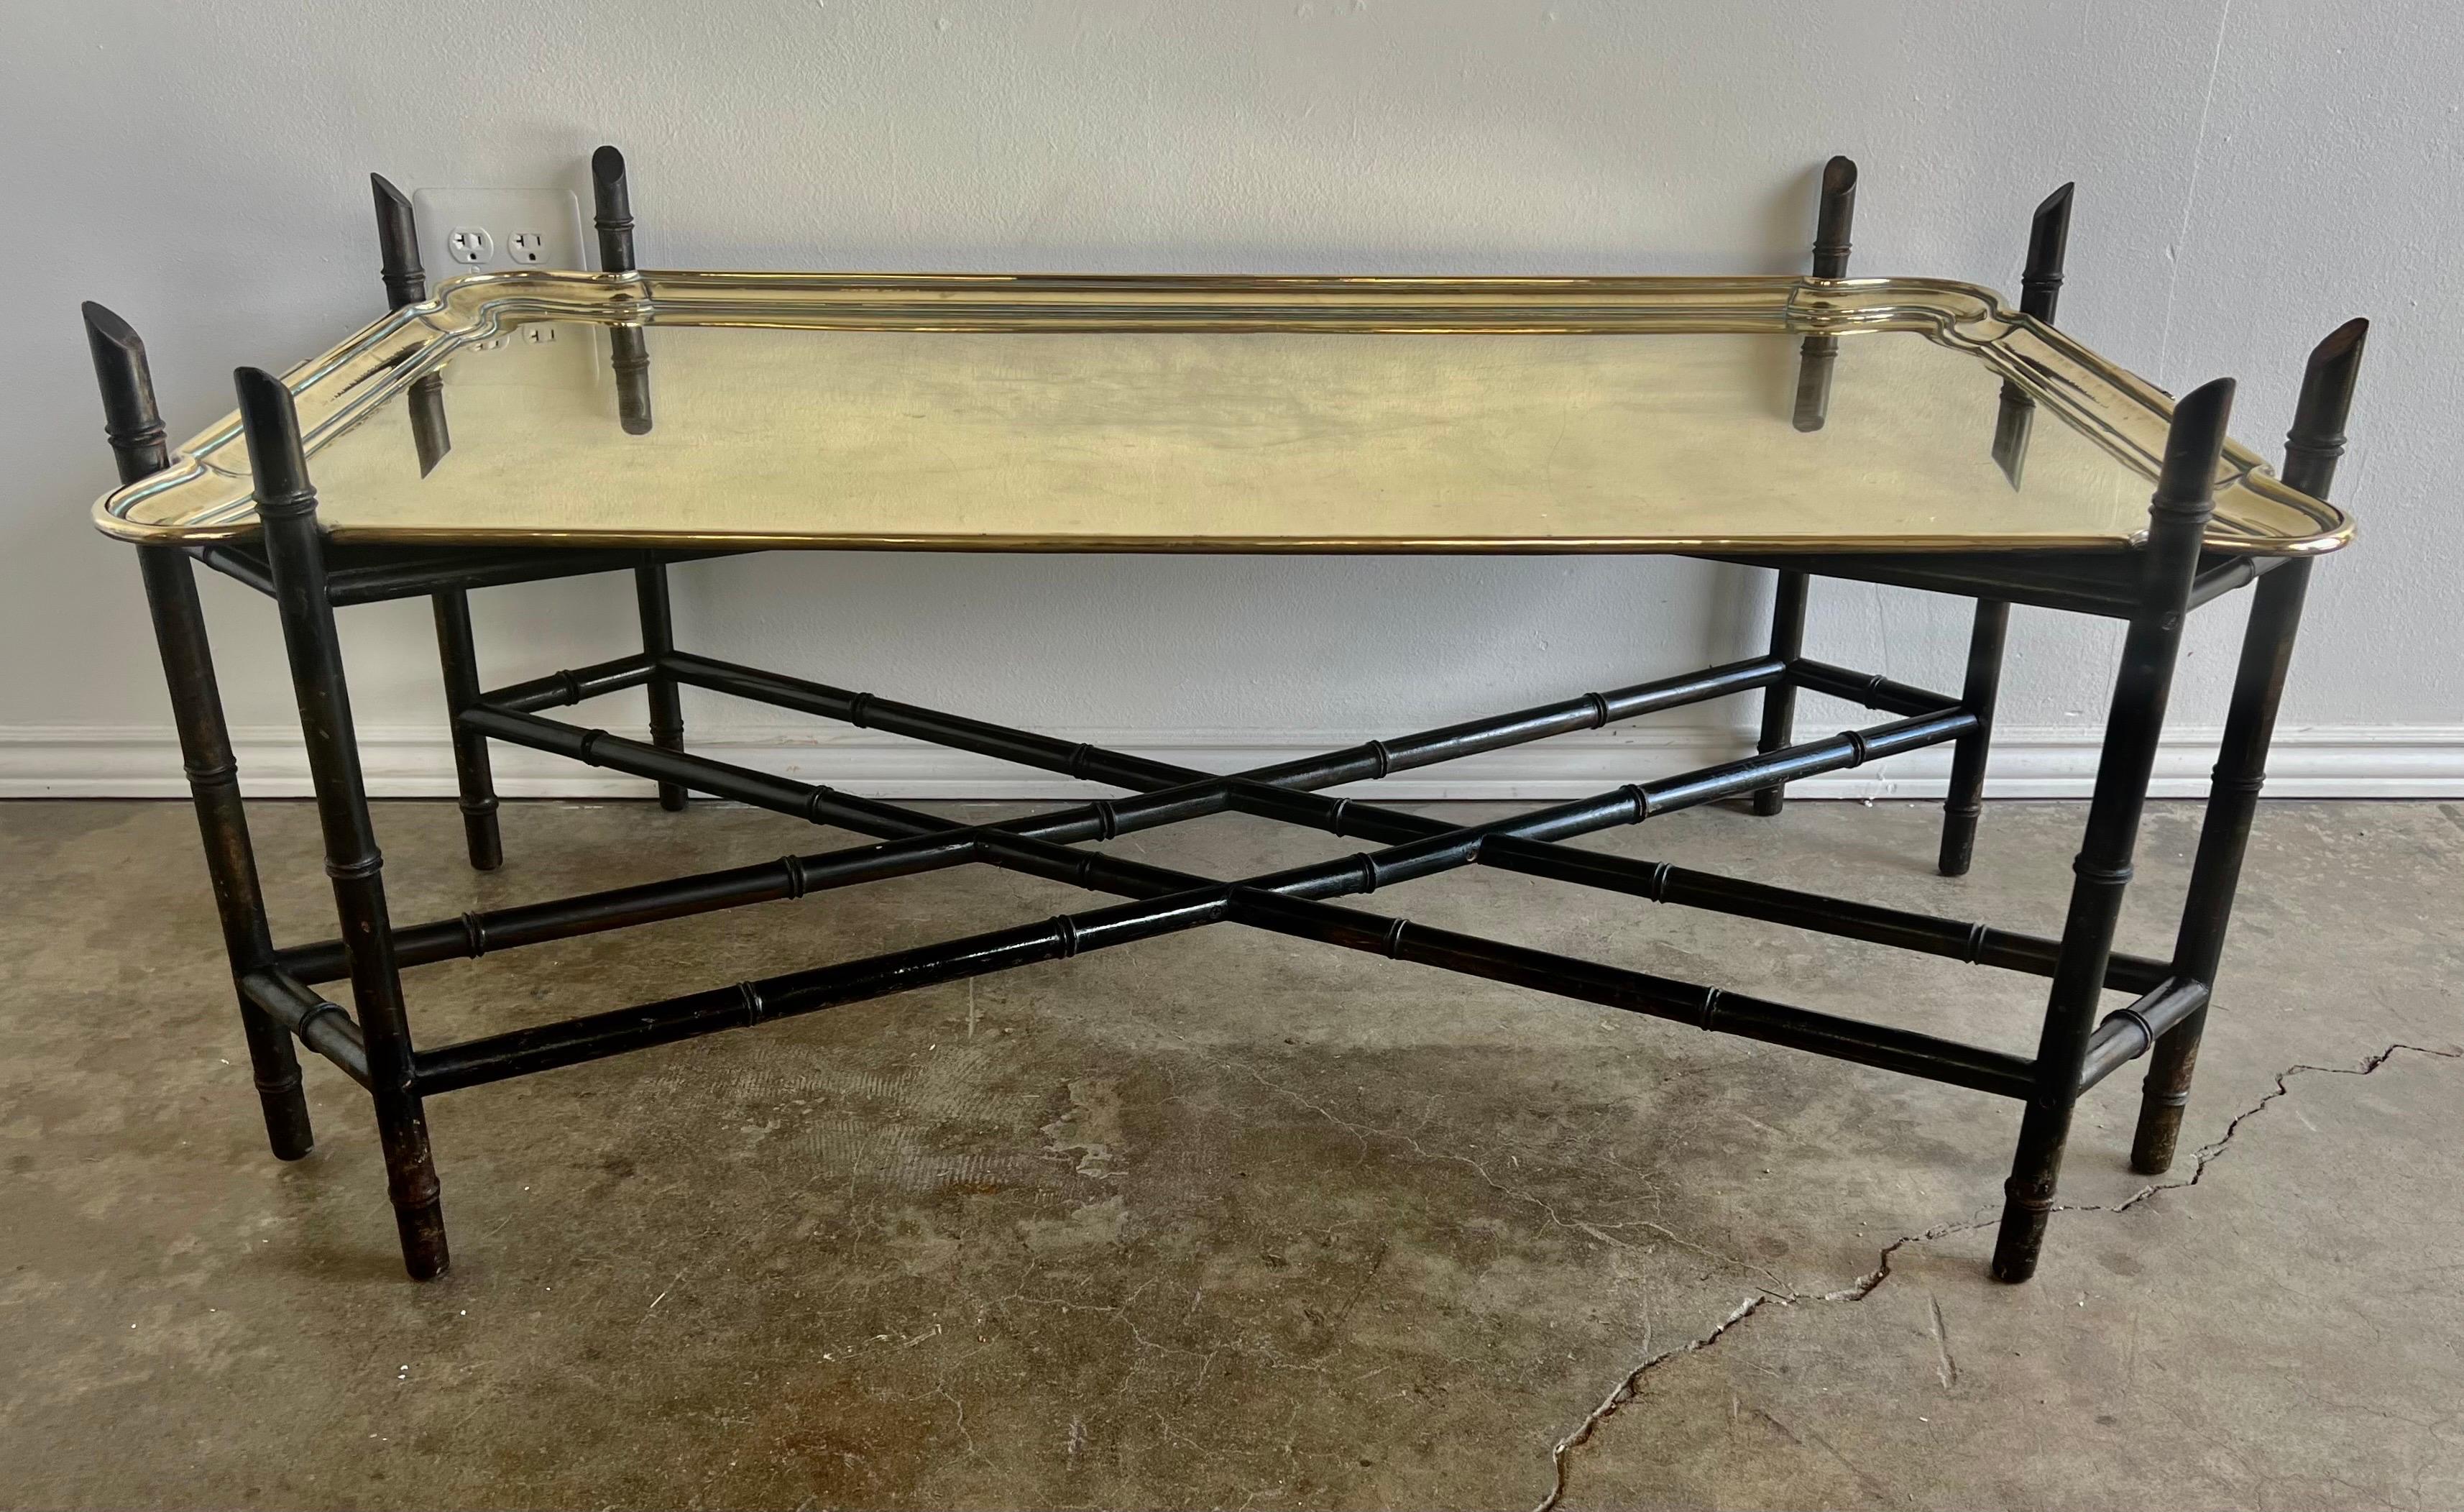 Early 20th century solid brass tray table. The brass tray sits on a carved wood chinoiserie style base with a bottom stretcher.. The base is painted black. The two handled monumental tray is stamped 